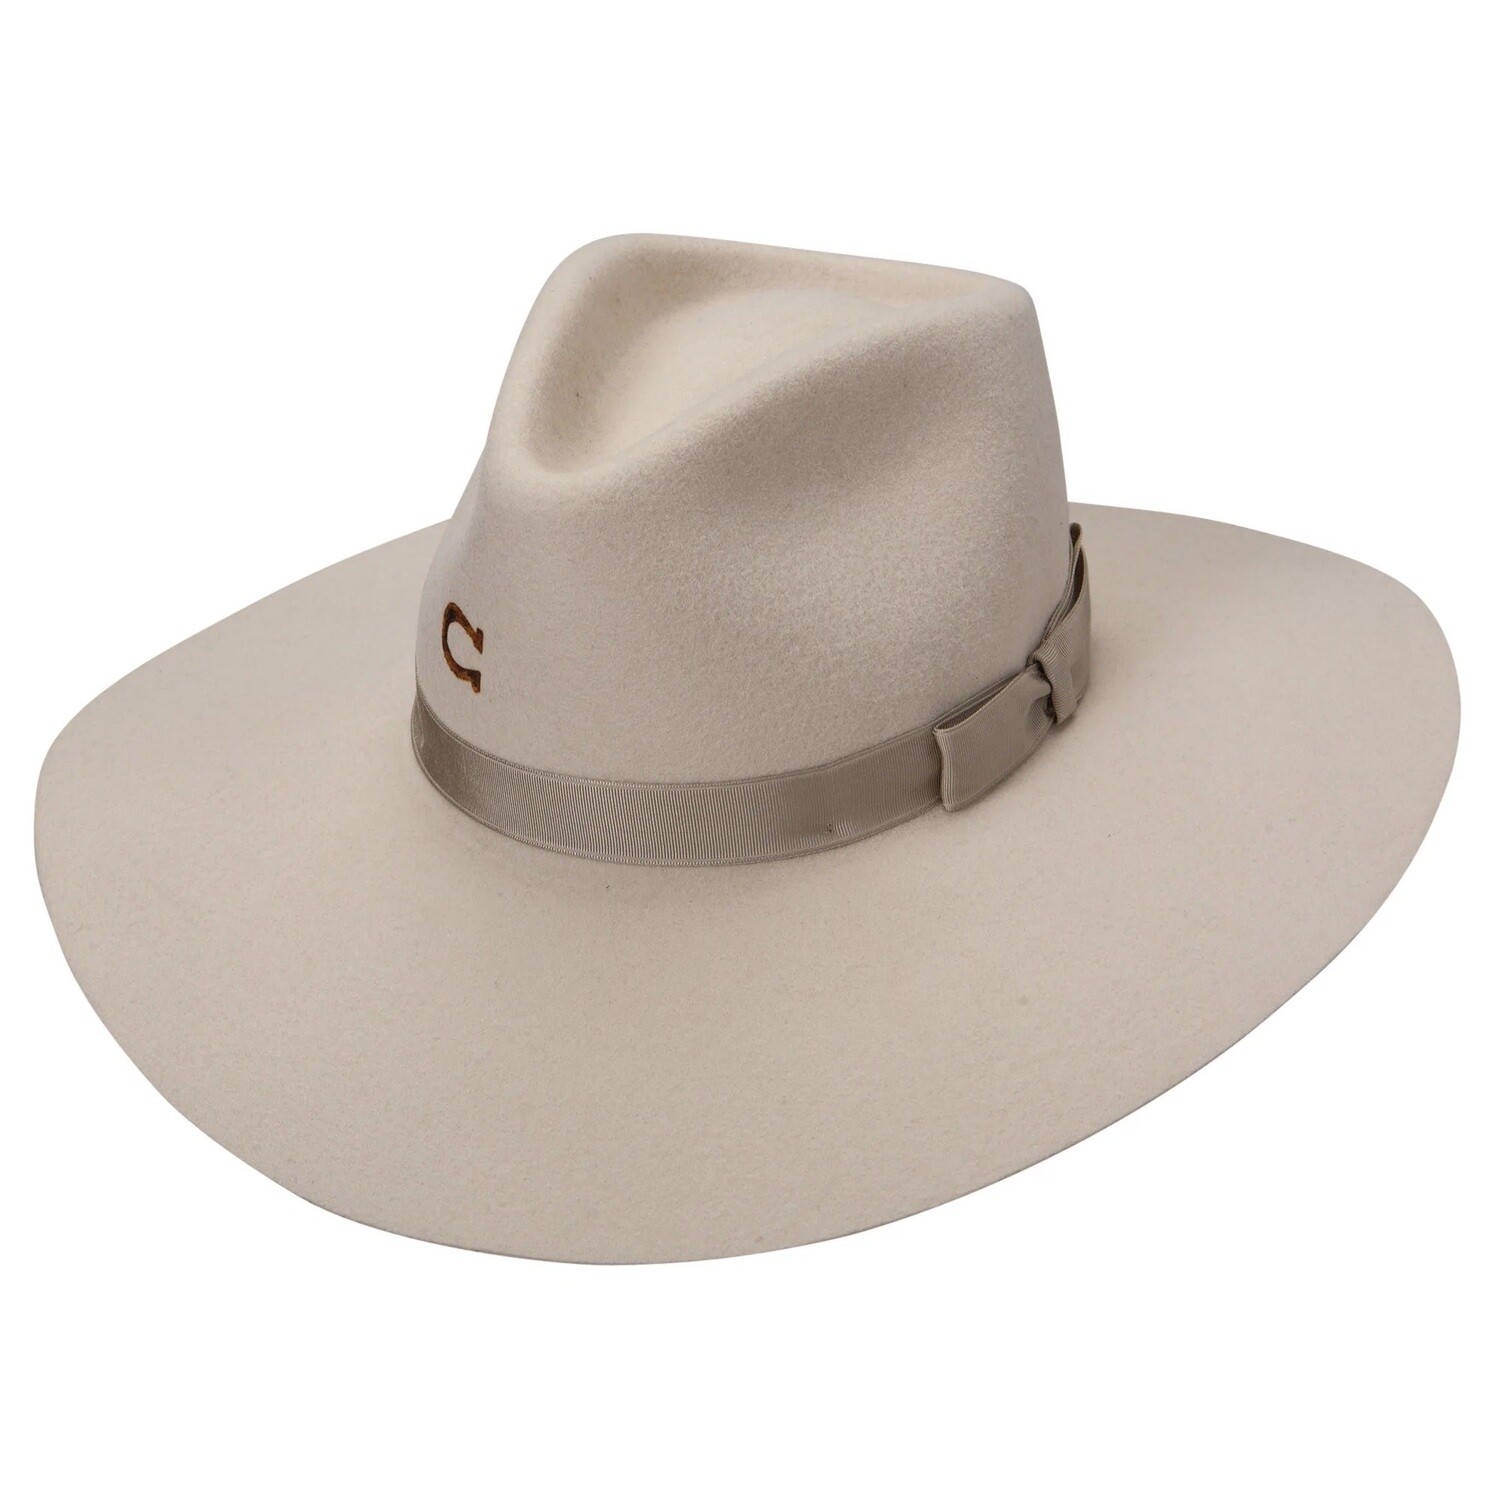 CHARLIE 1 HORSE HIGHWAY HAT - SILVER BELLY